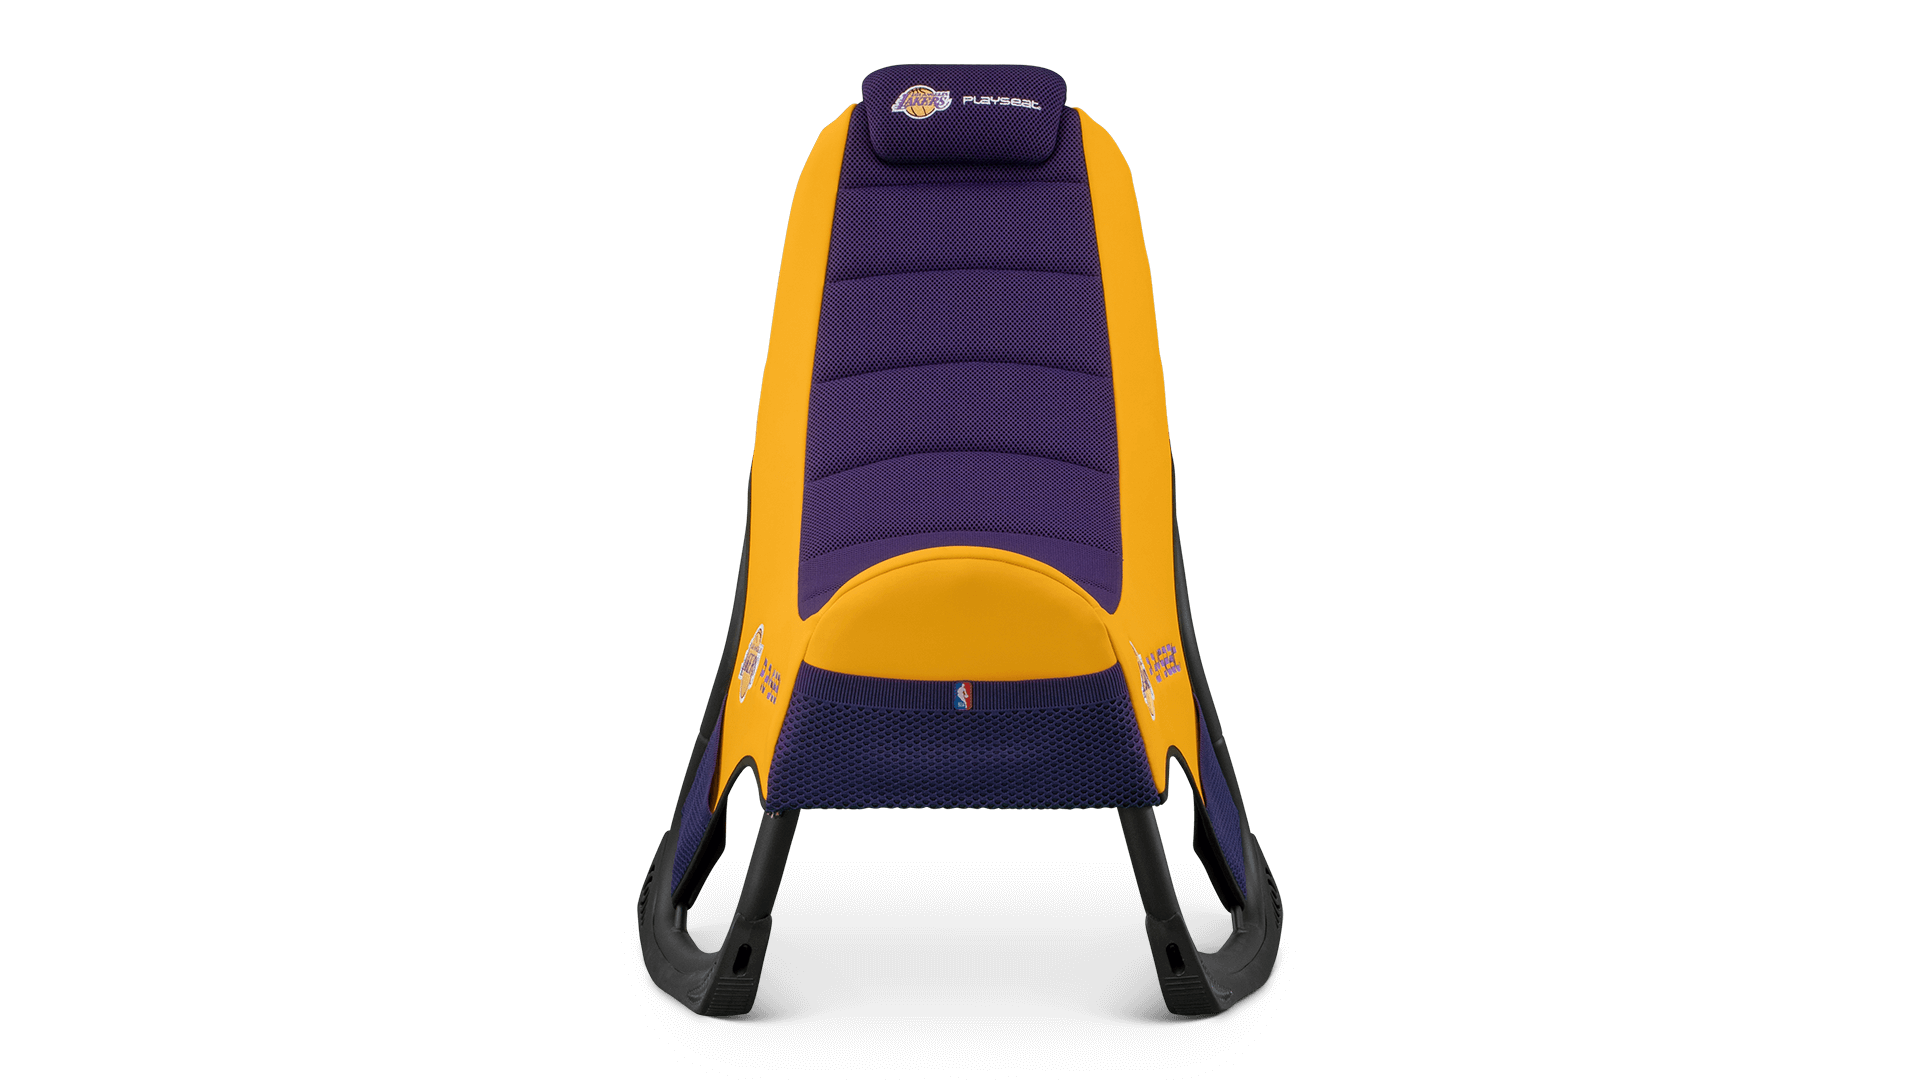 playseat-go-nba-la-lakers-gaming-seat-front-view-1920x1080.png